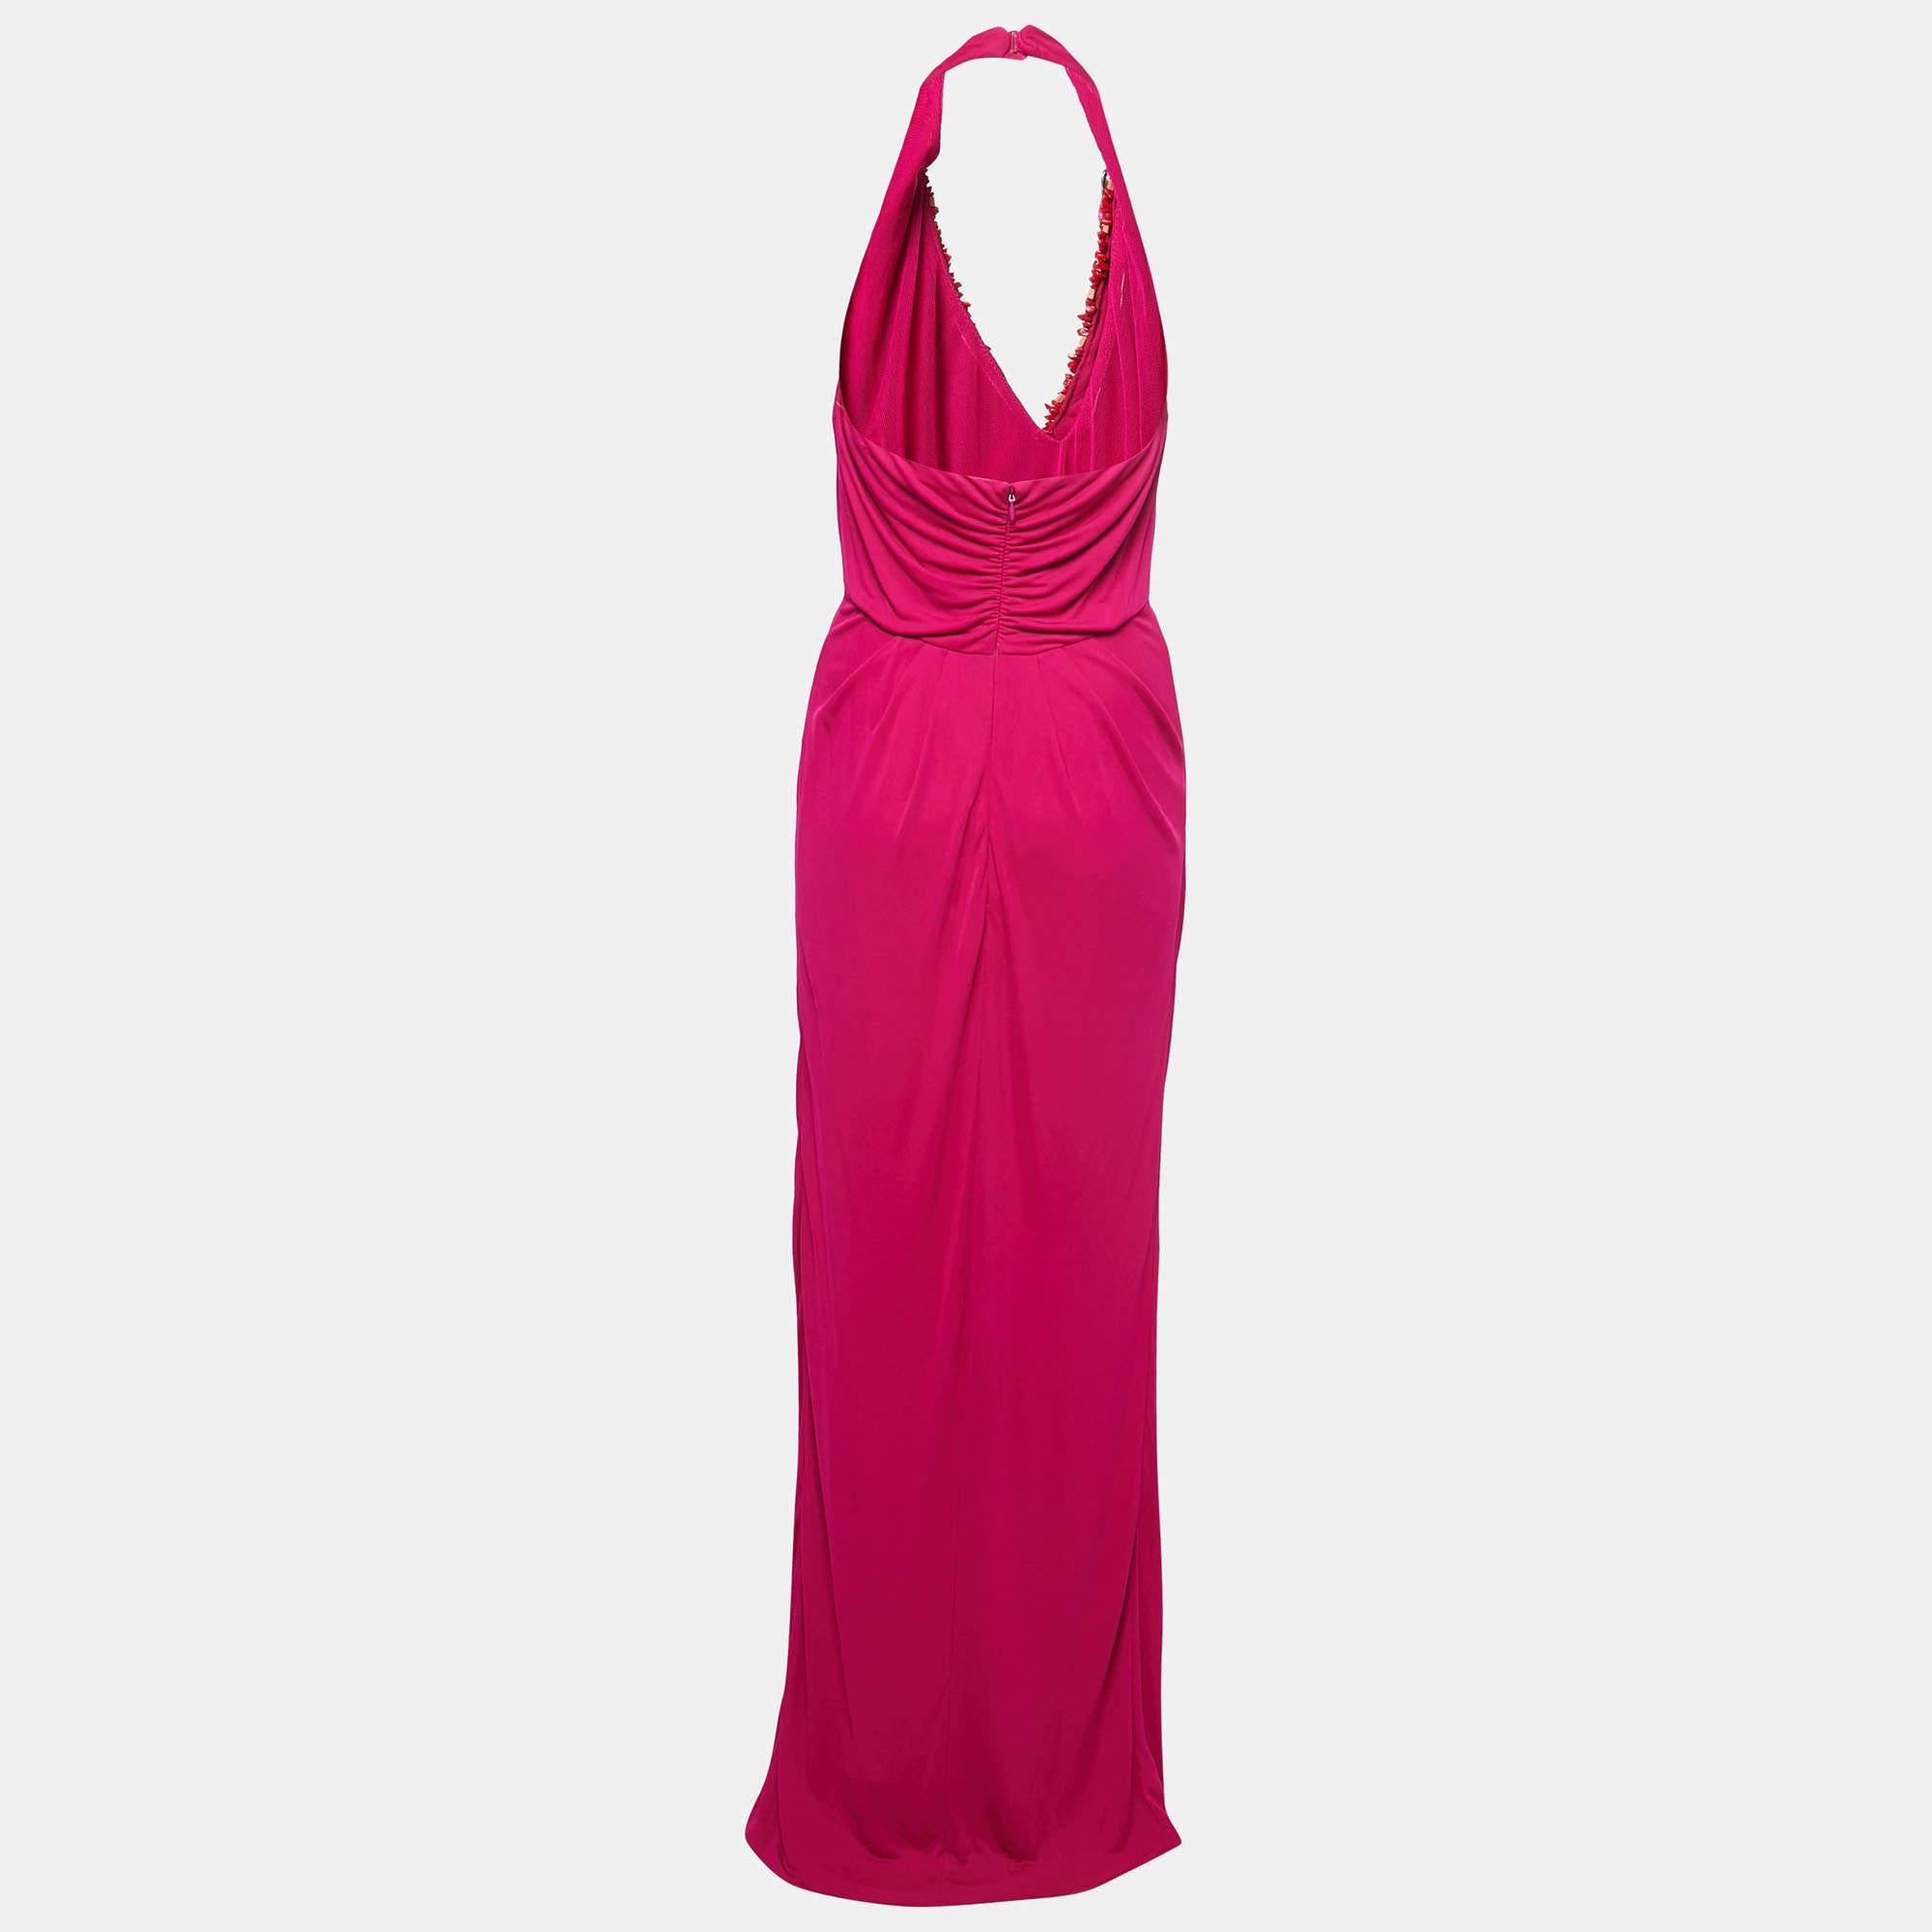 Resplendent, elegant, and gorgeous, this gown defines it all. Flaunting a floor-length silhouette, this gown is beautified using stunning details and a stylish neckline. Wear it with statement accessories and a defining clutch.

Includes: Brand Tag
